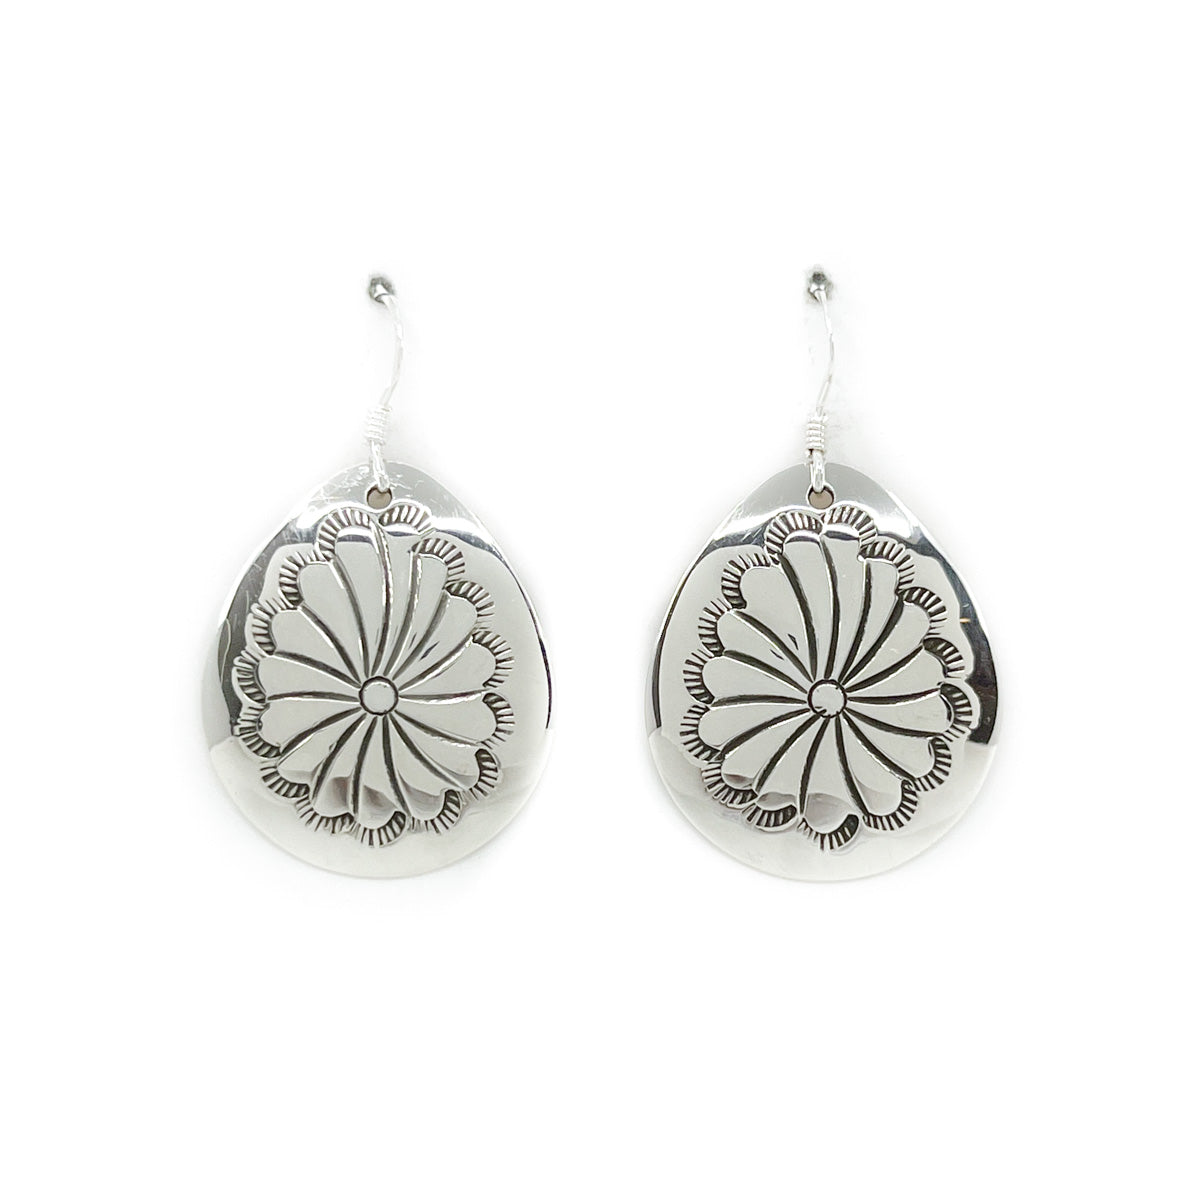 Hand stamped sterling silver drop earring with sterling silver wires By Diné silversmith, Janet Manuelito Stampwork may vary slightly with each pair Measures approximately 1 inch long by 1 inch wide, dangles 1.5 inches from earlobe *All sales on jewelry are final. No returns or exchanges.